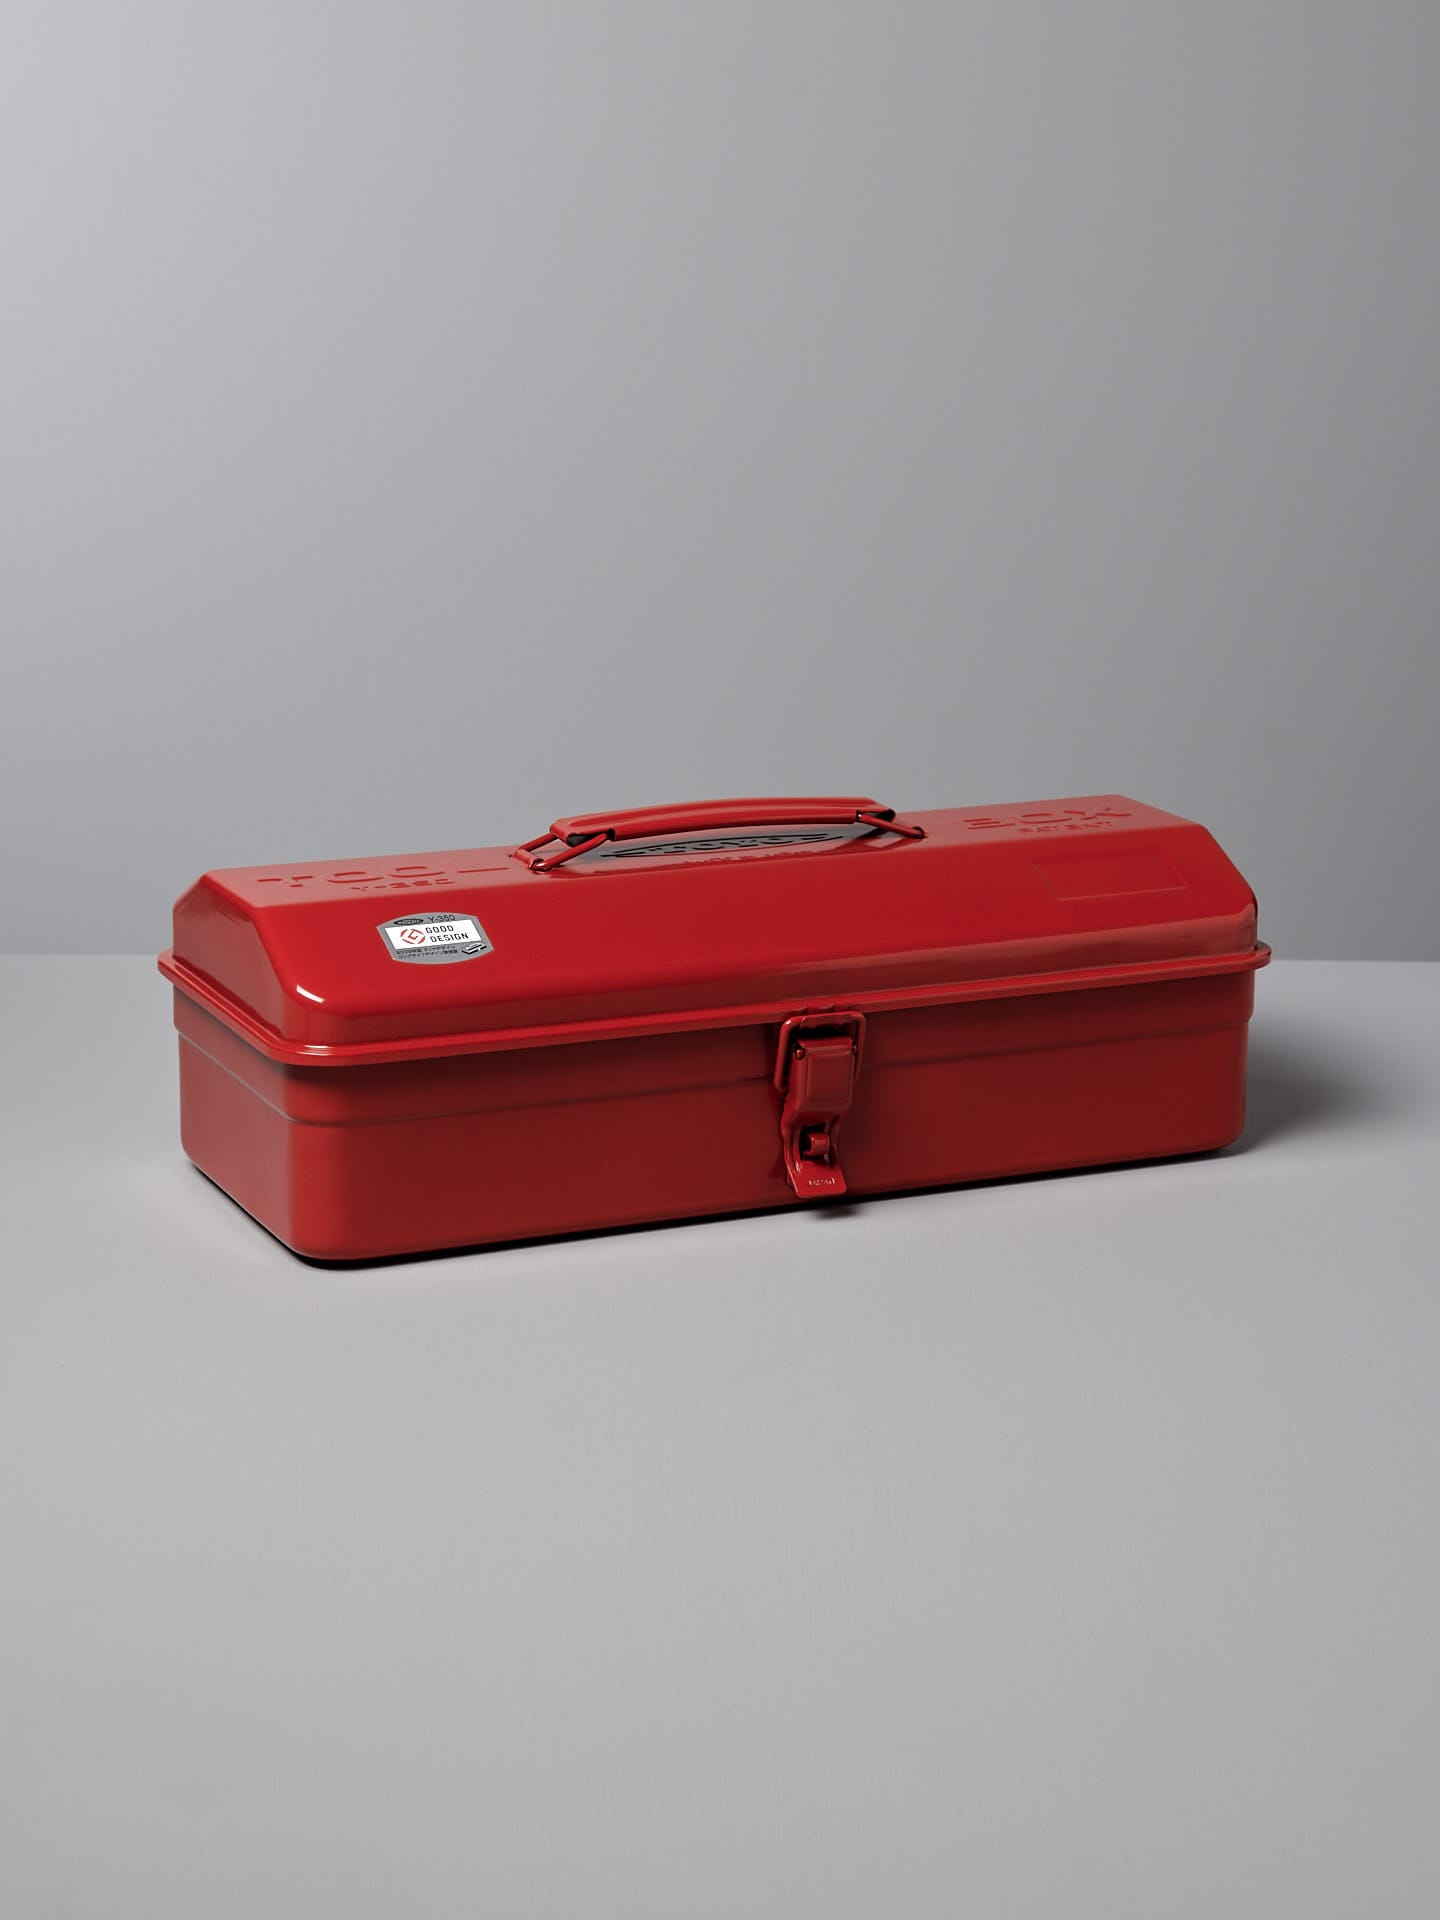 A closed red steel toolbox with a handle on top and a latch on the front, sitting on a gray surface against a gray background — an example of practical design that could easily merit a Good Design Award. This is the TOYO STEEL Camber-Top Toolbox Y-350 – Red.